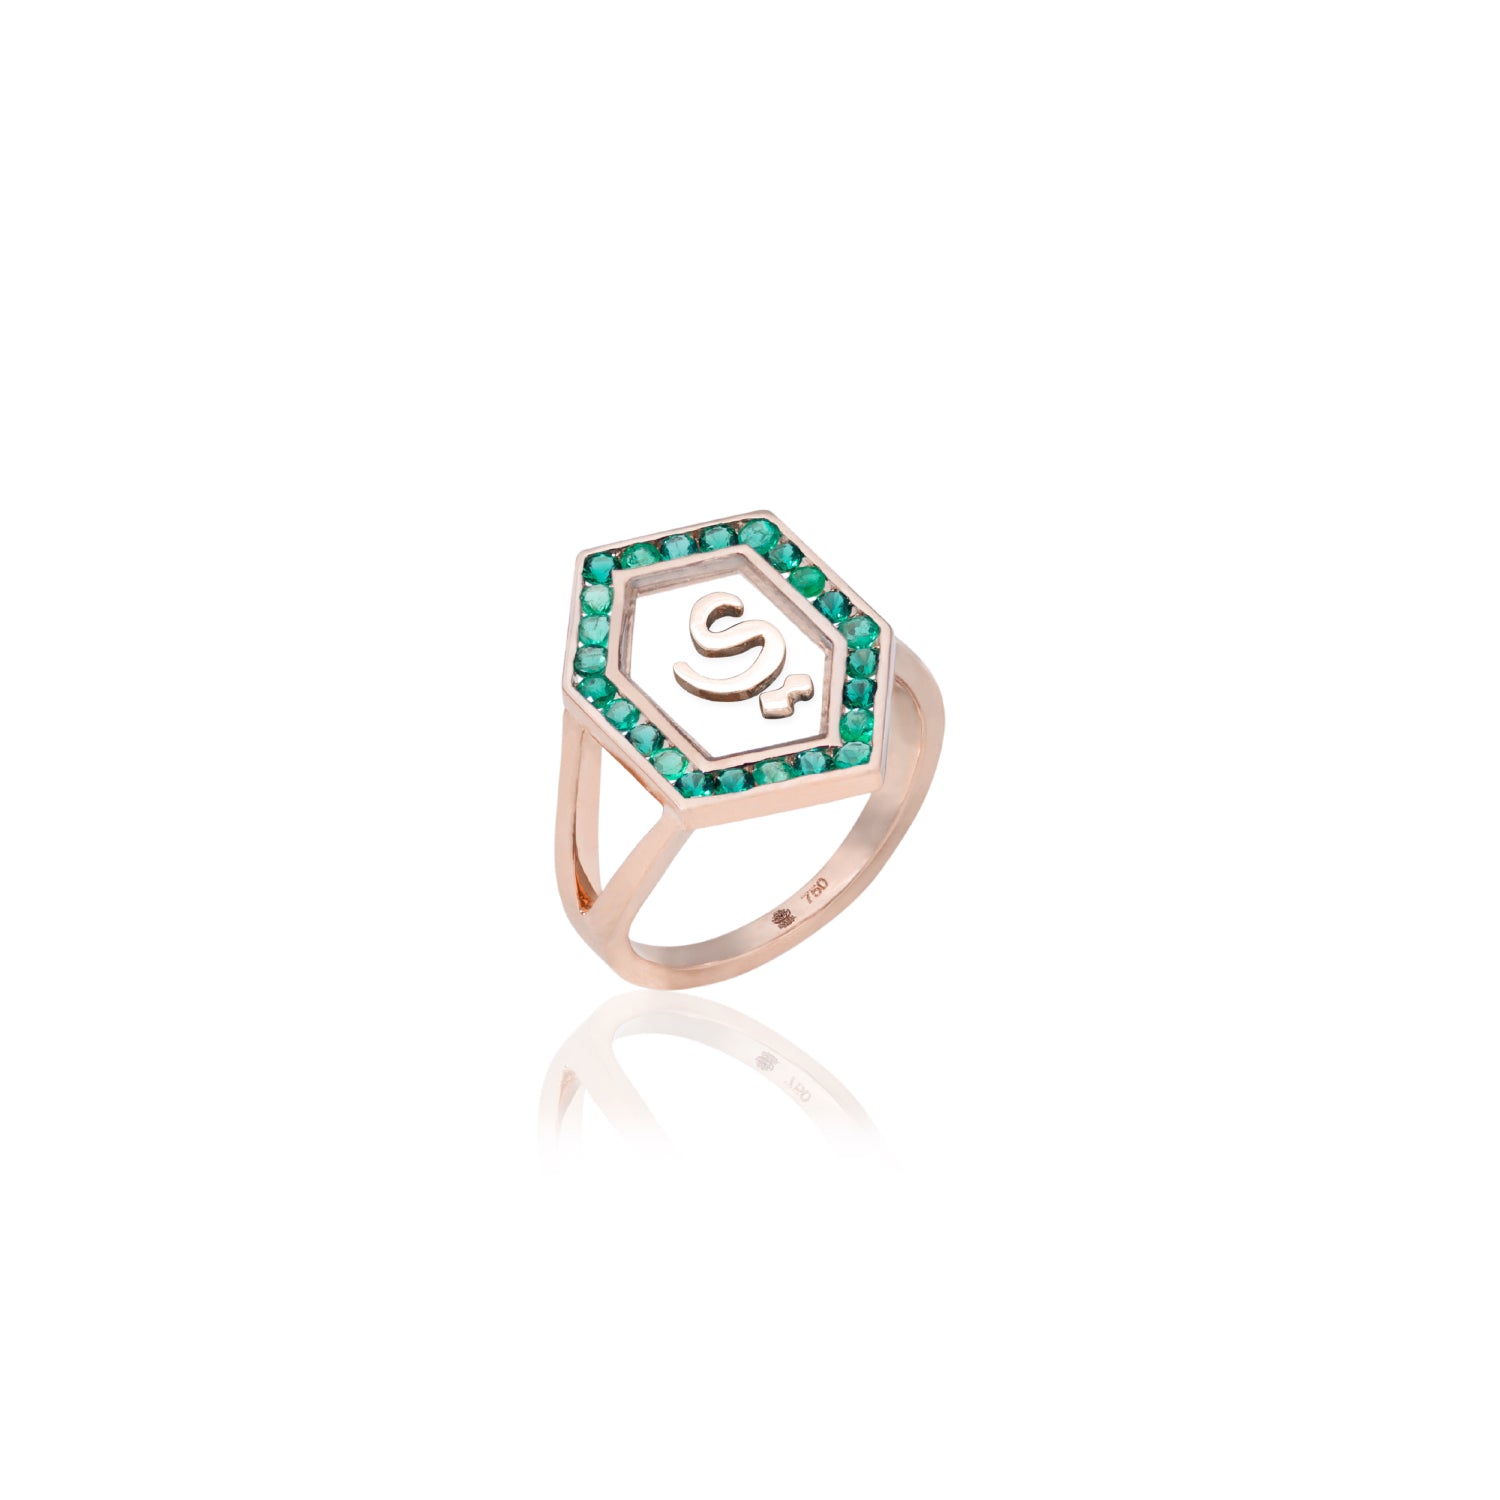 Qamoos 1.0 Letter ي Emerald Ring in Rose Gold